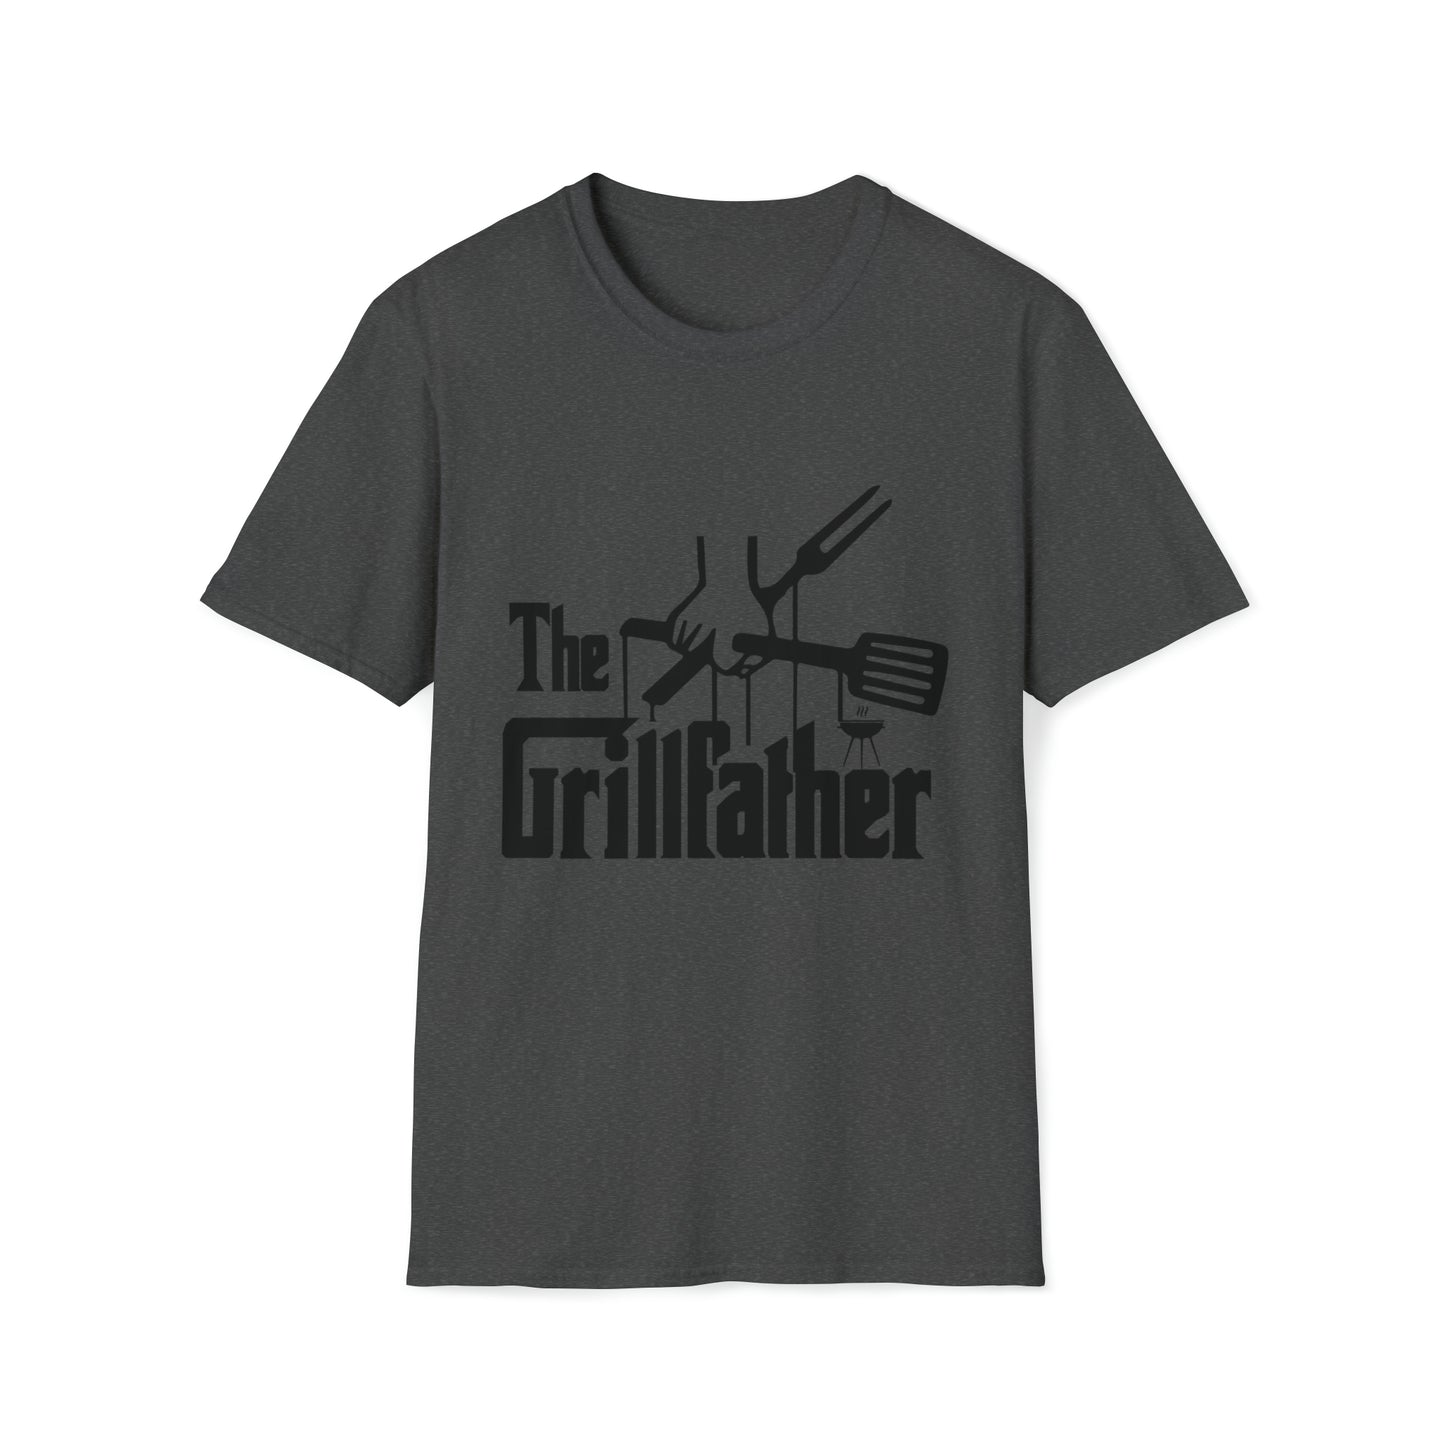 The Grillfather - Softstyle T-Shirt